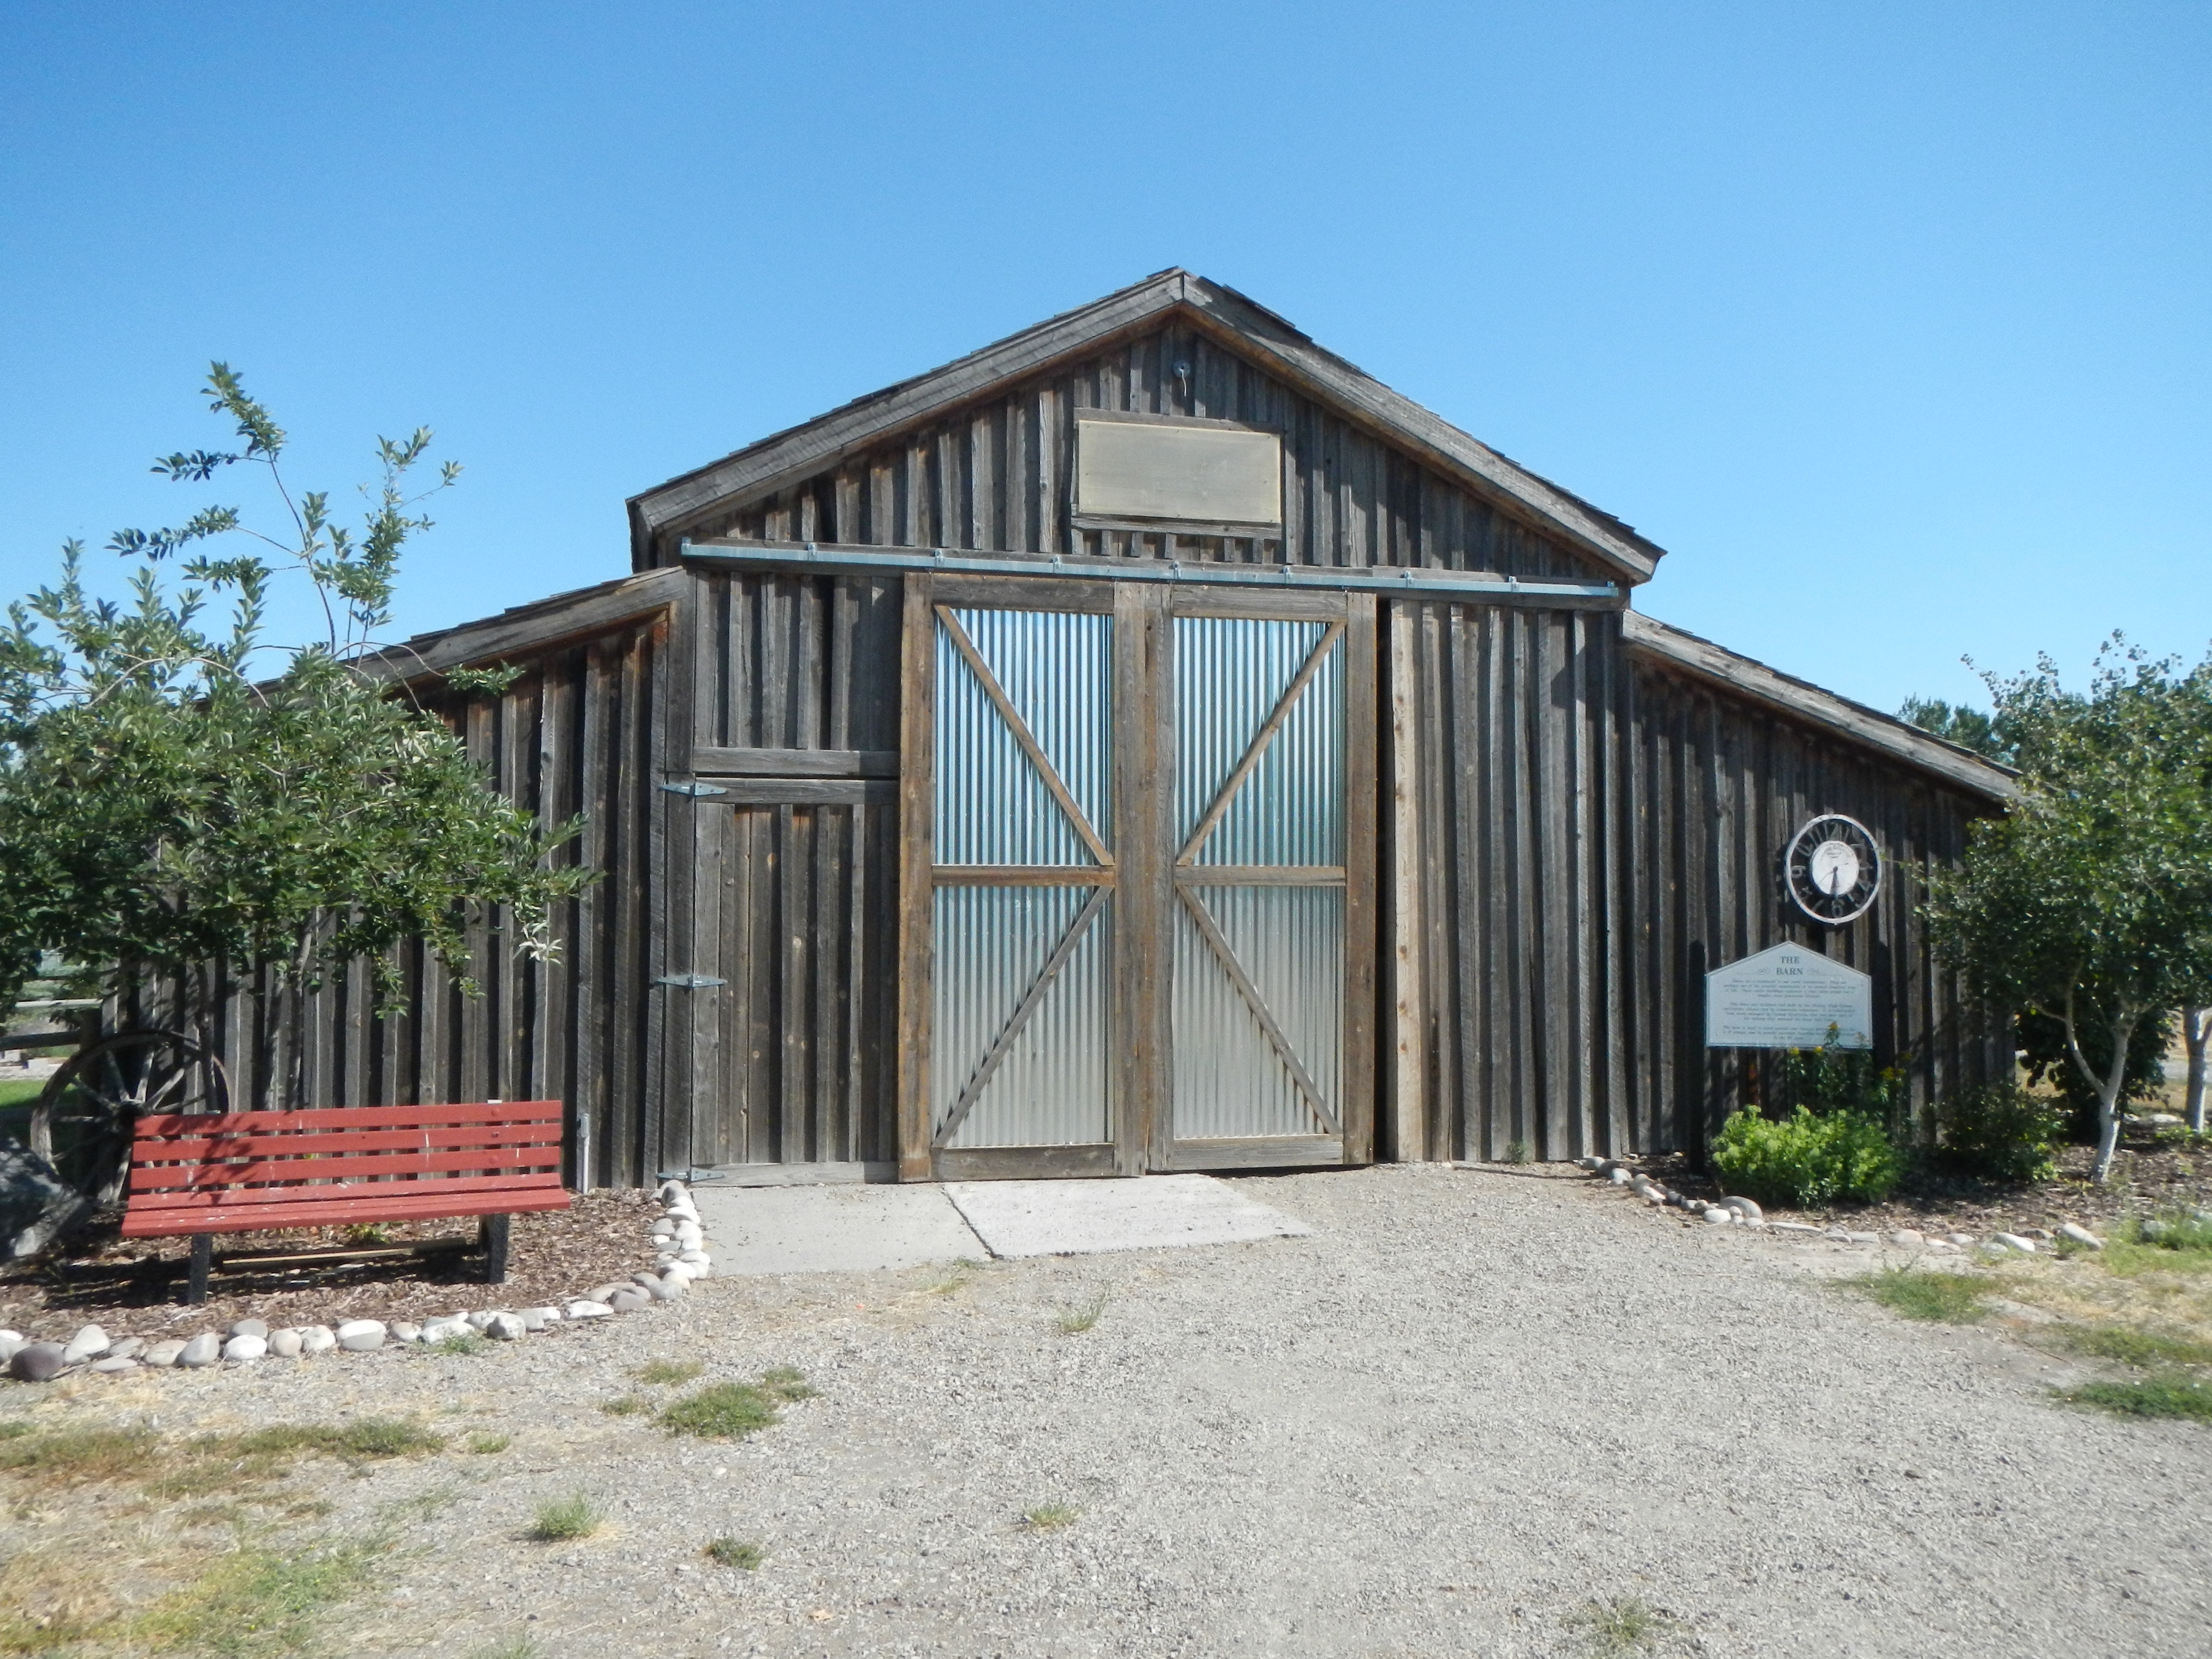 The Barn and Marker